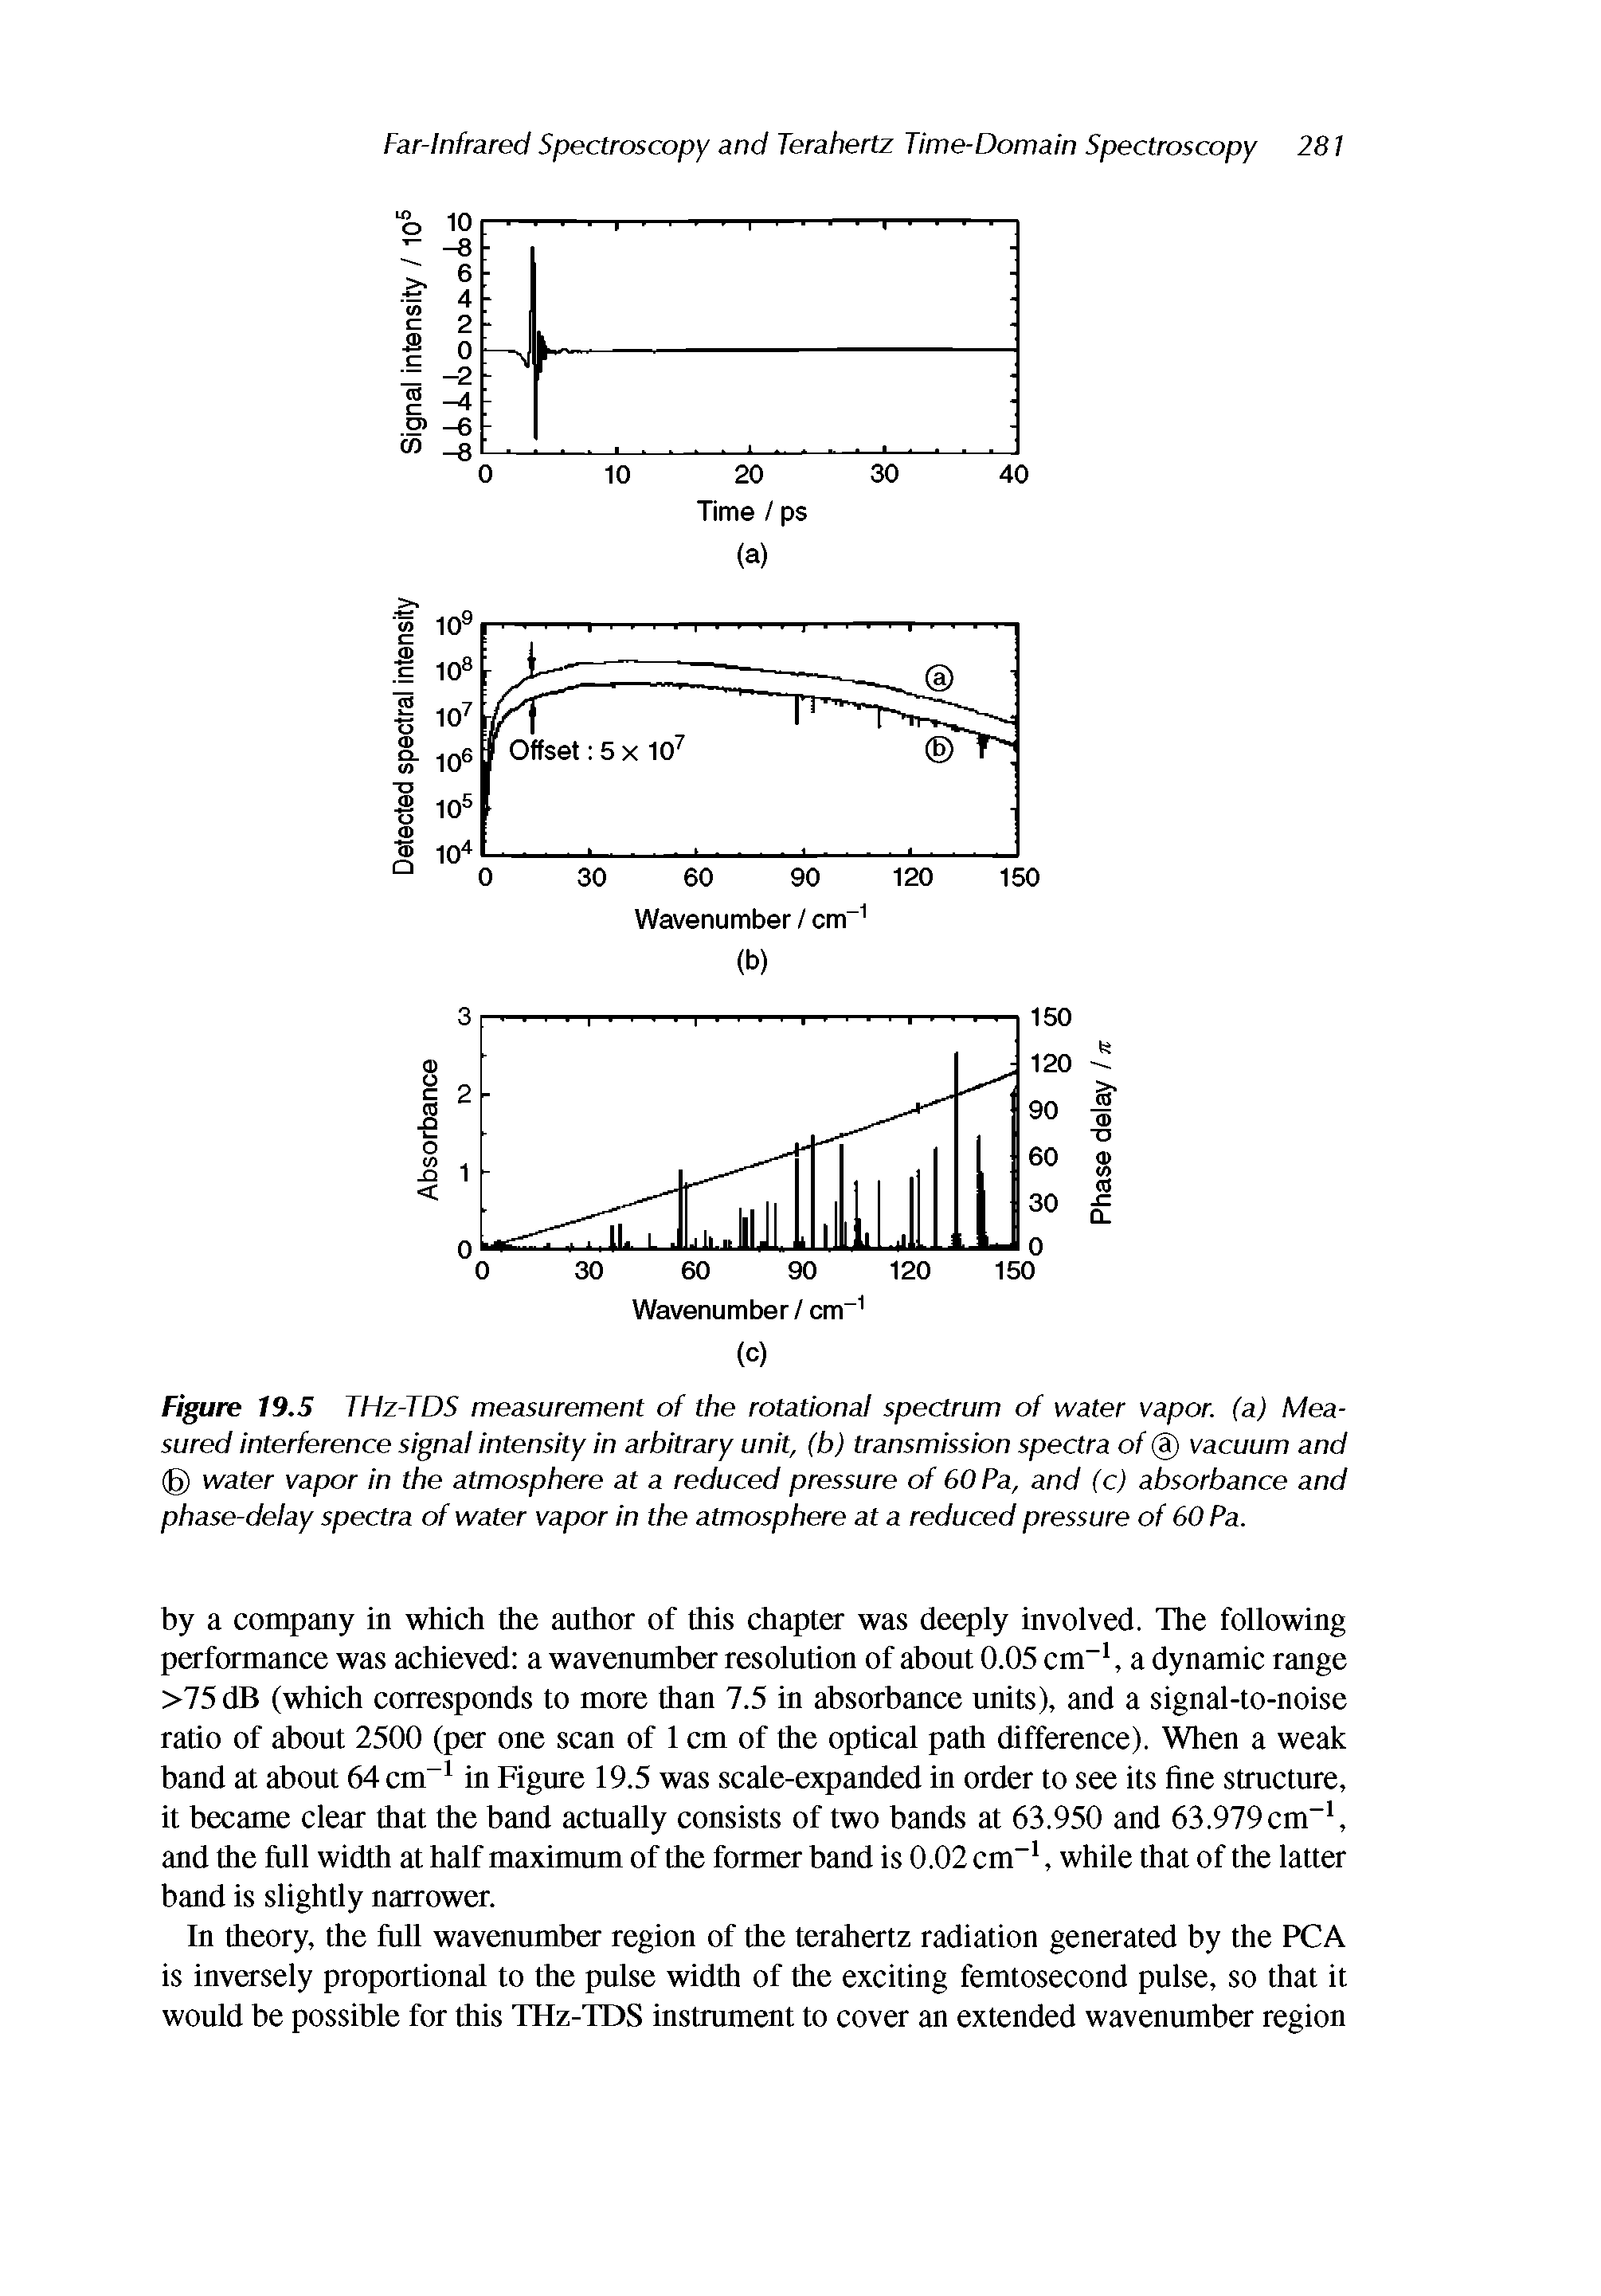 Figure 19.5 TFIz-TDS measurement of the rotational spectrum of water vapor, (a) Measured Interference signal Intensity In arbitrary unit, (b) transmission spectra of 0 vacuum and (g) water vapor in the atmosphere at a reduced pressure of 60 Pa, and (c) absorbance and phase-delay spectra of water vapor In the atmosphere at a reduced pressure of 60 Pa.